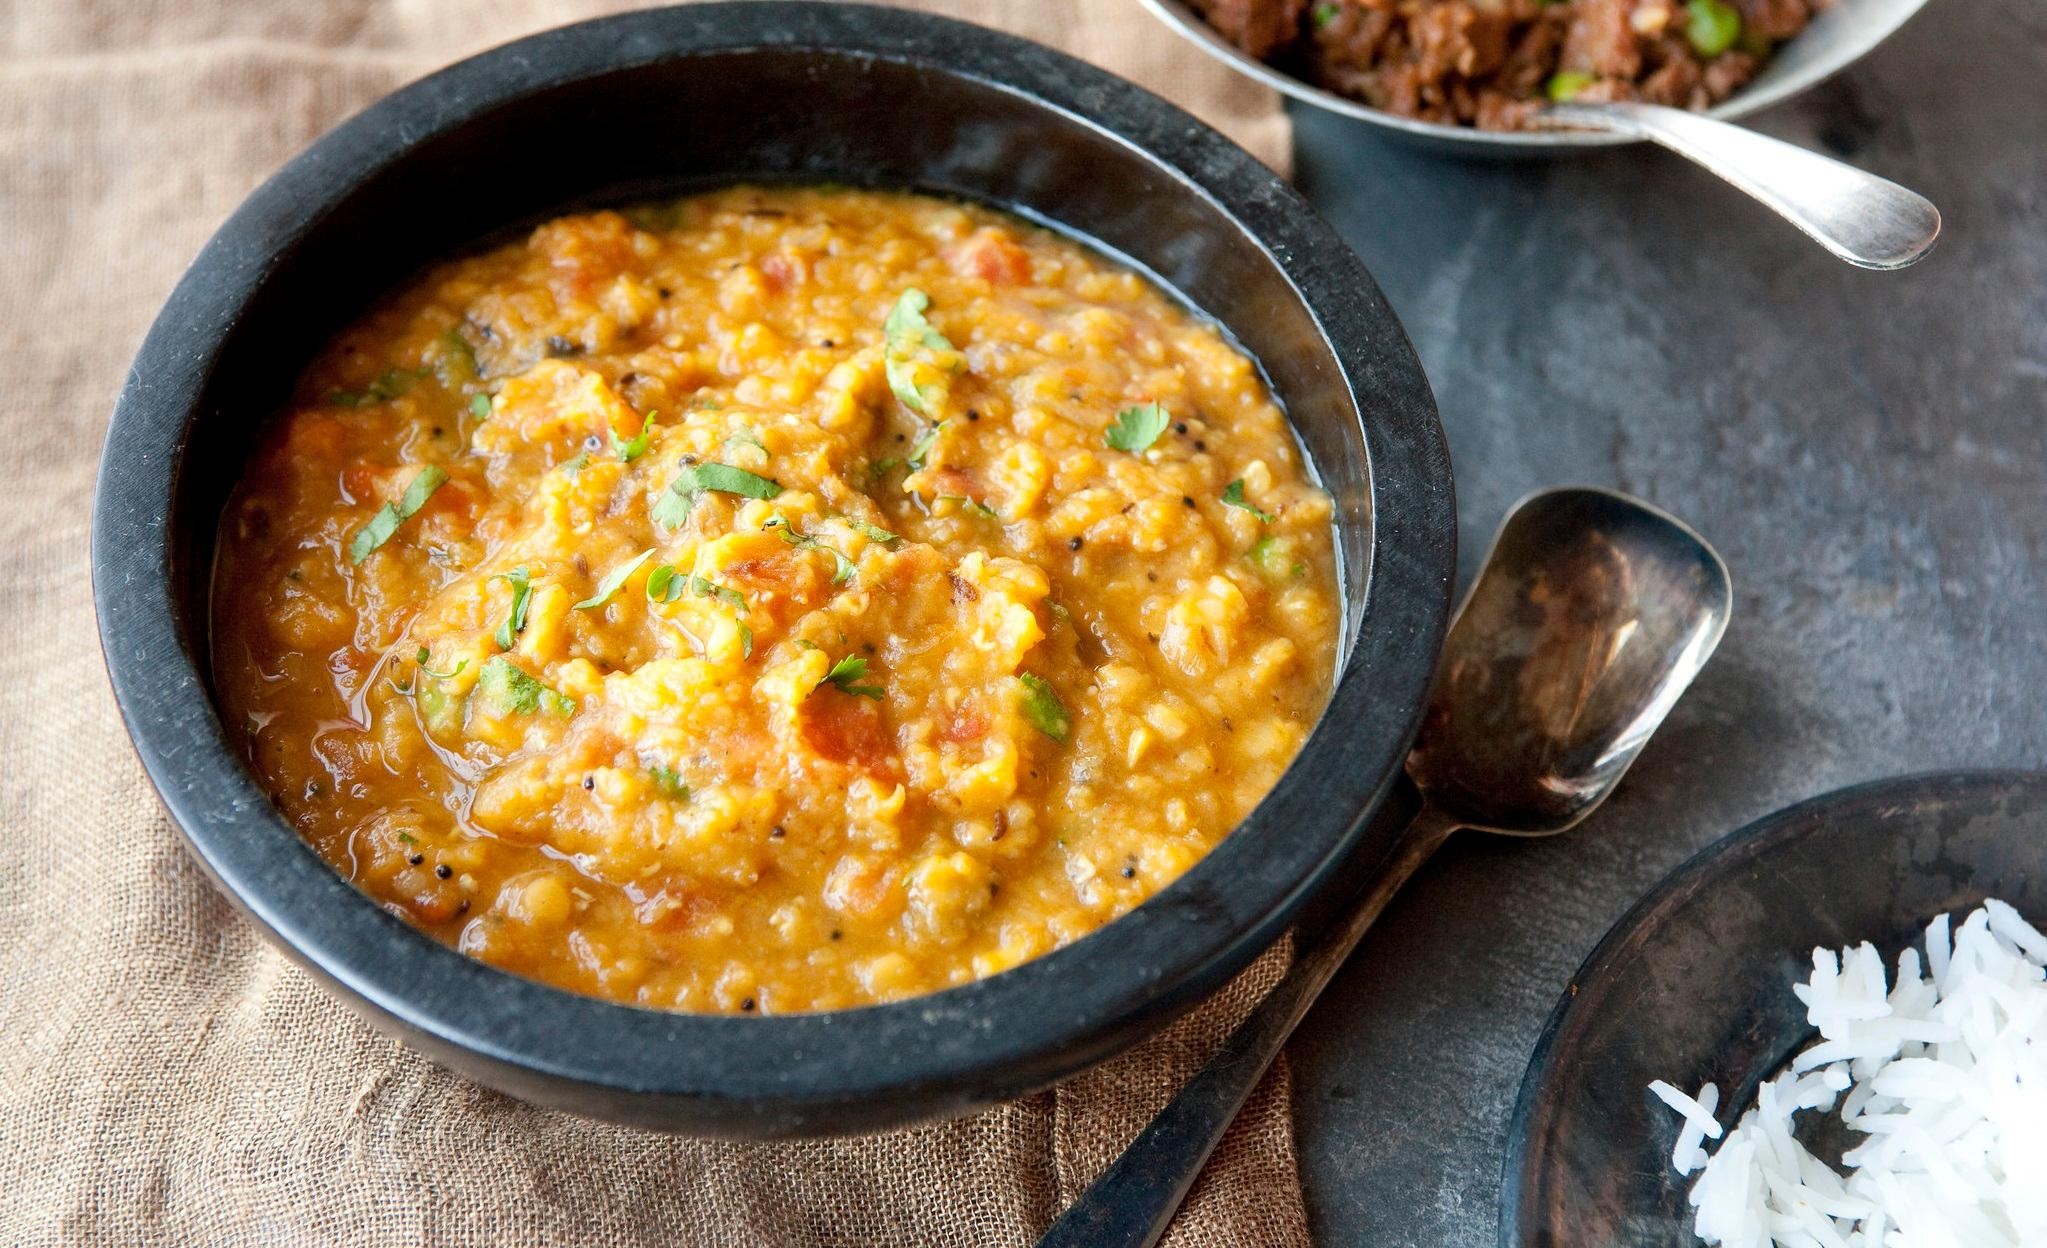 Masala Dal (yellow lentils with spices)